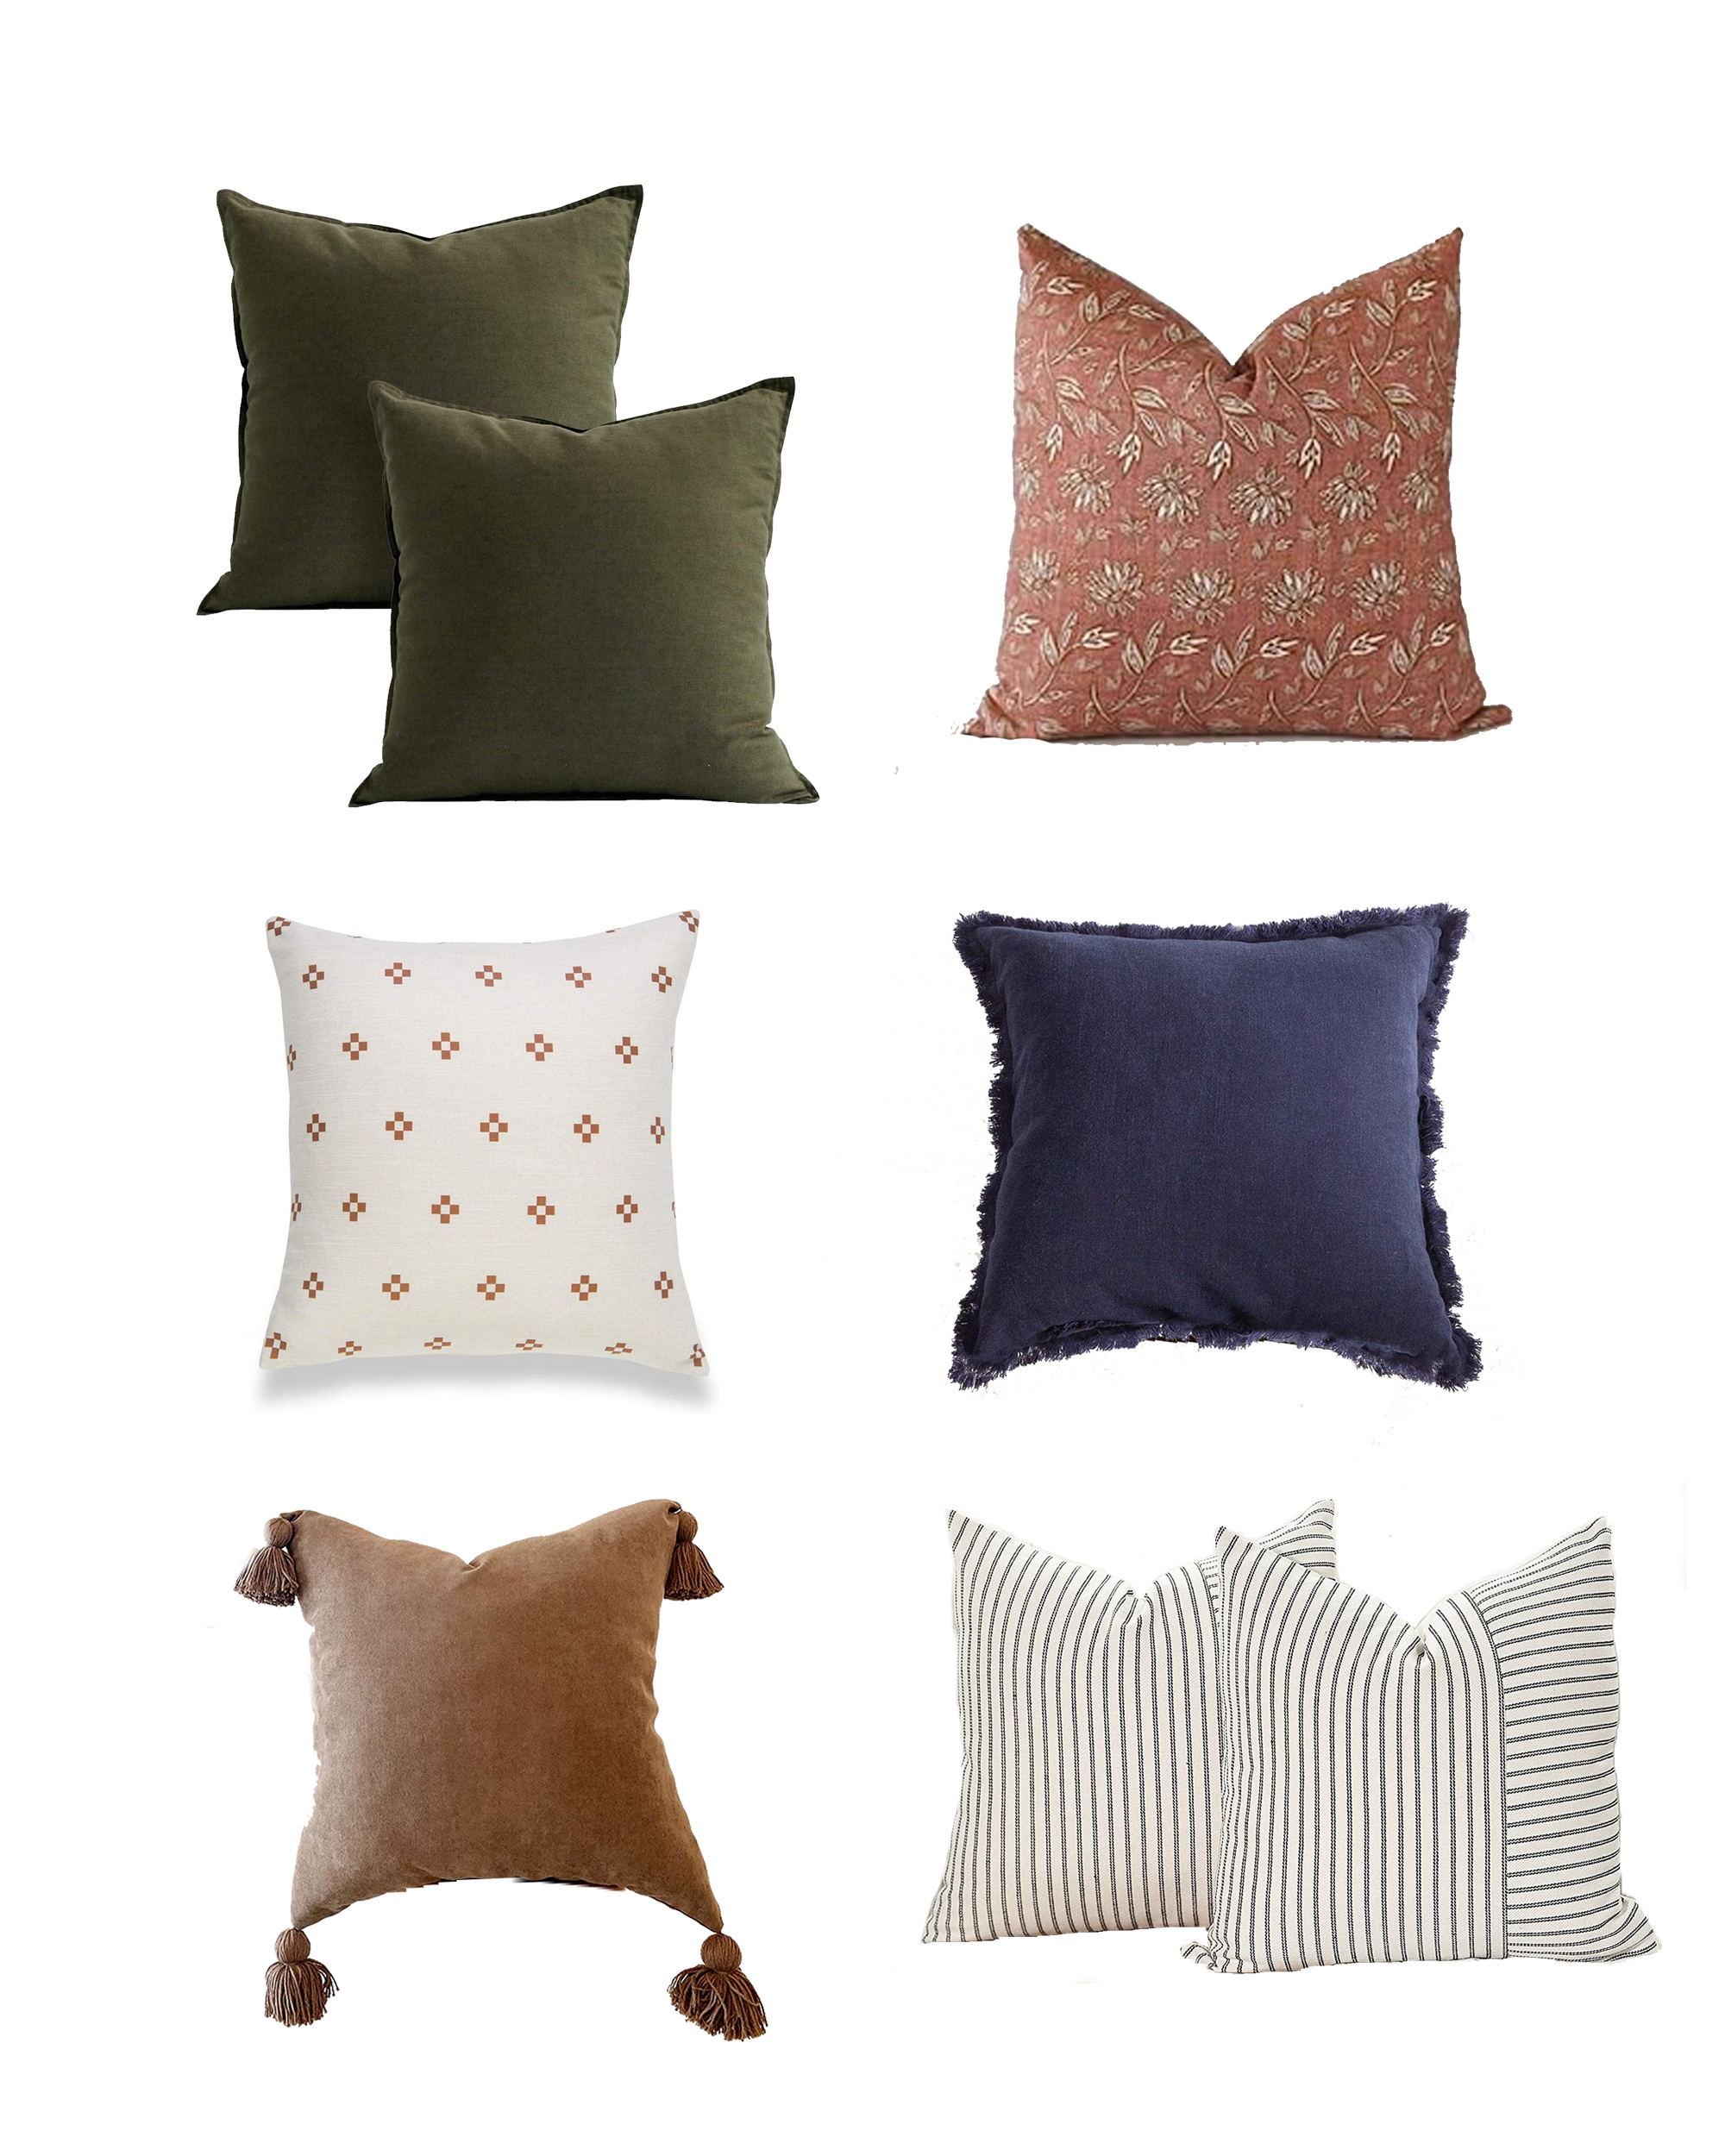 Where to Find Affordable Throw Pillows (Amazon Round-Up)